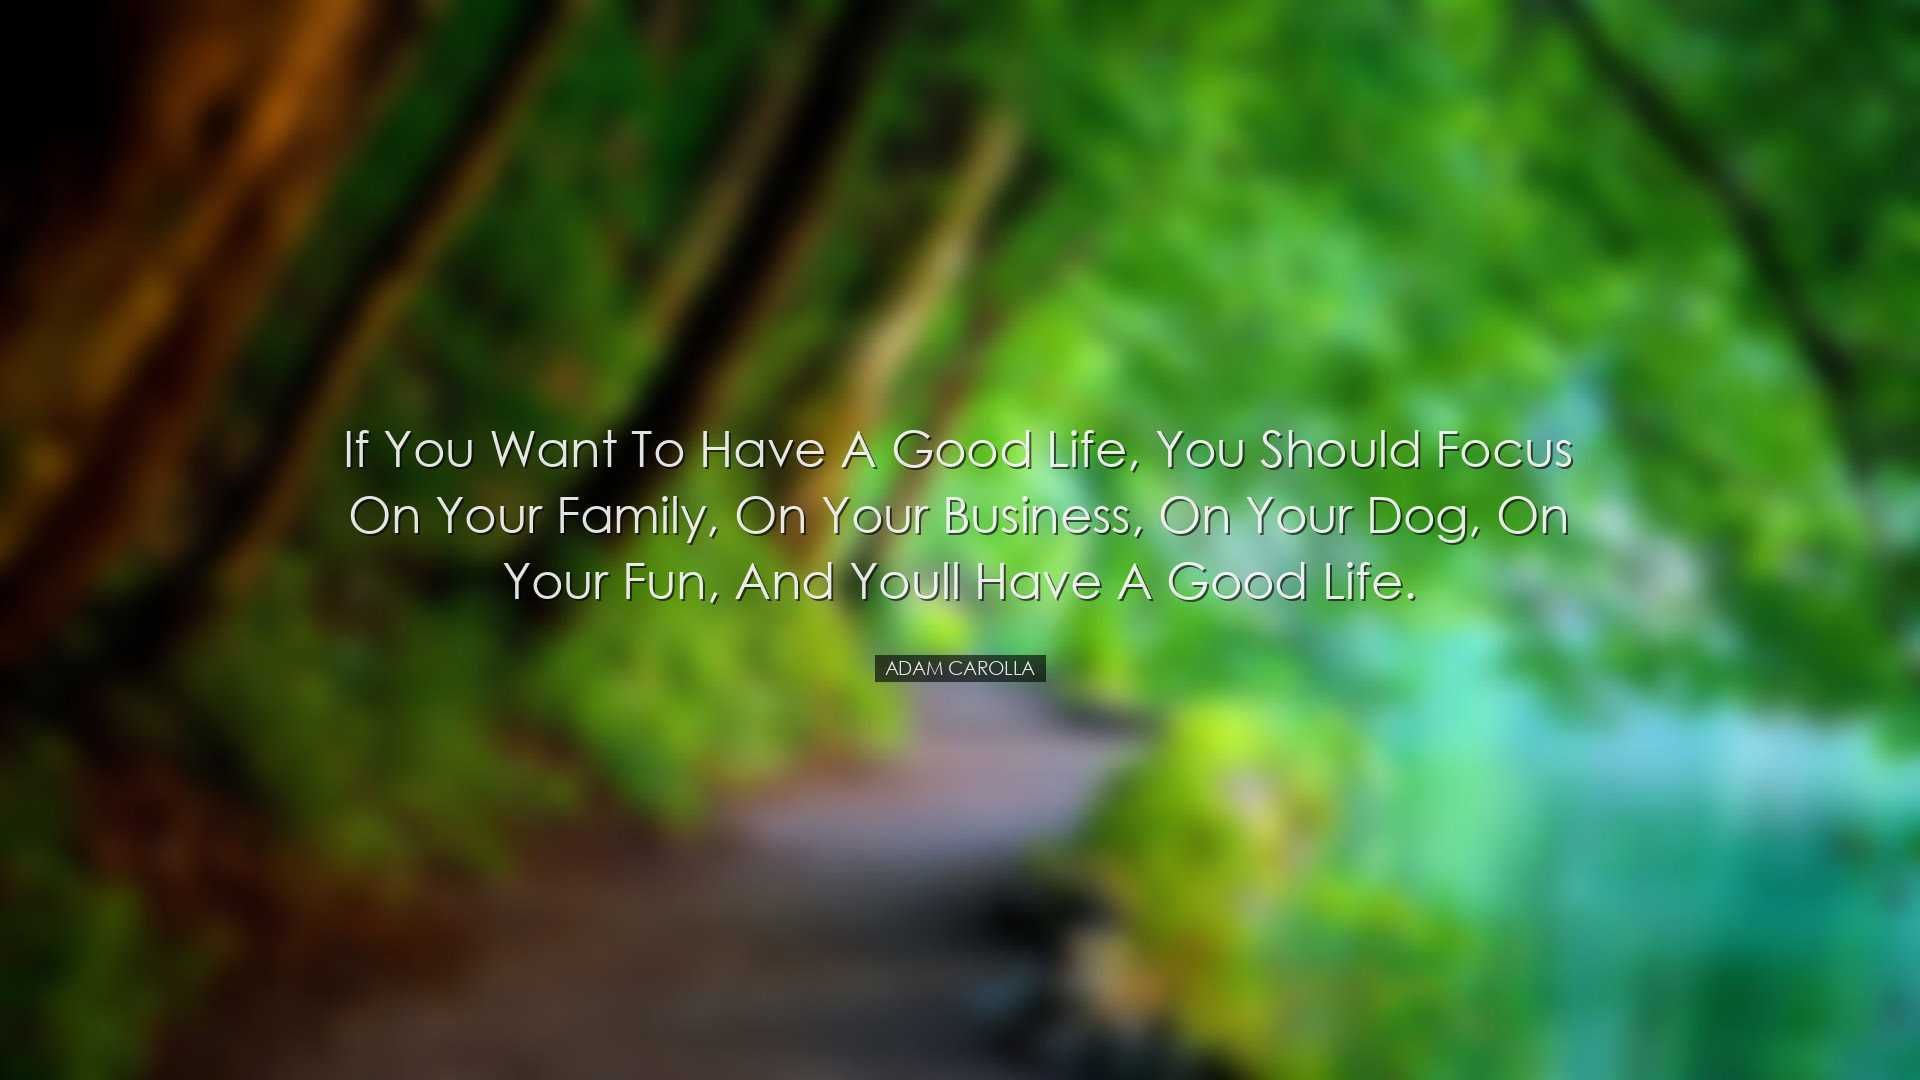 If you want to have a good life, you should focus on your family,